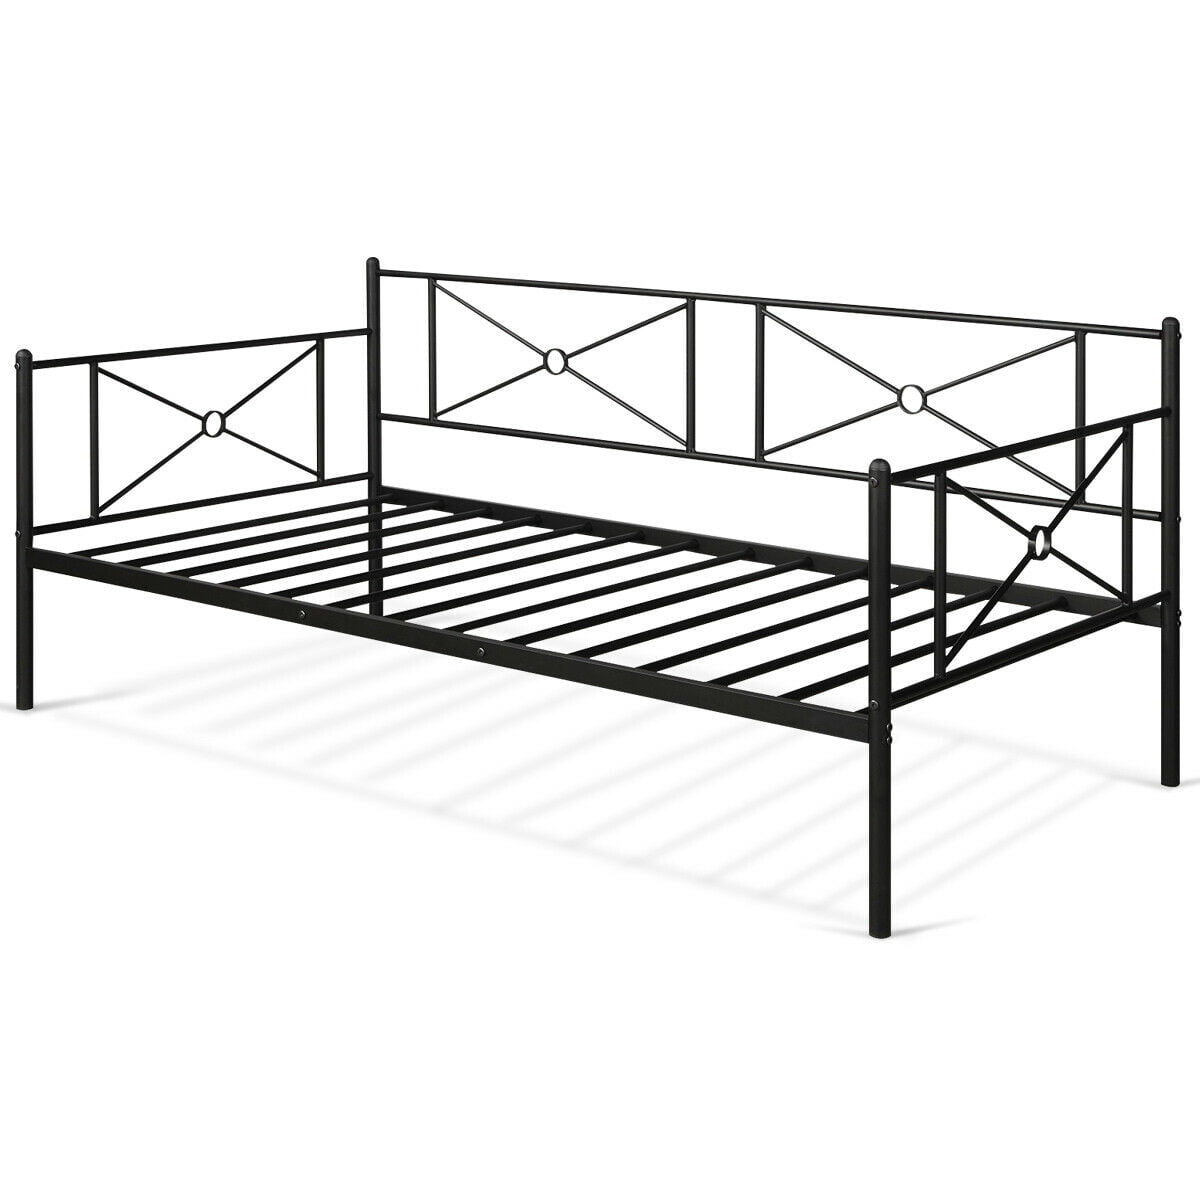 Details about   Metal Daybed Frame Twin Size Multi-function Platform Bed Stable Steel Slats Home 